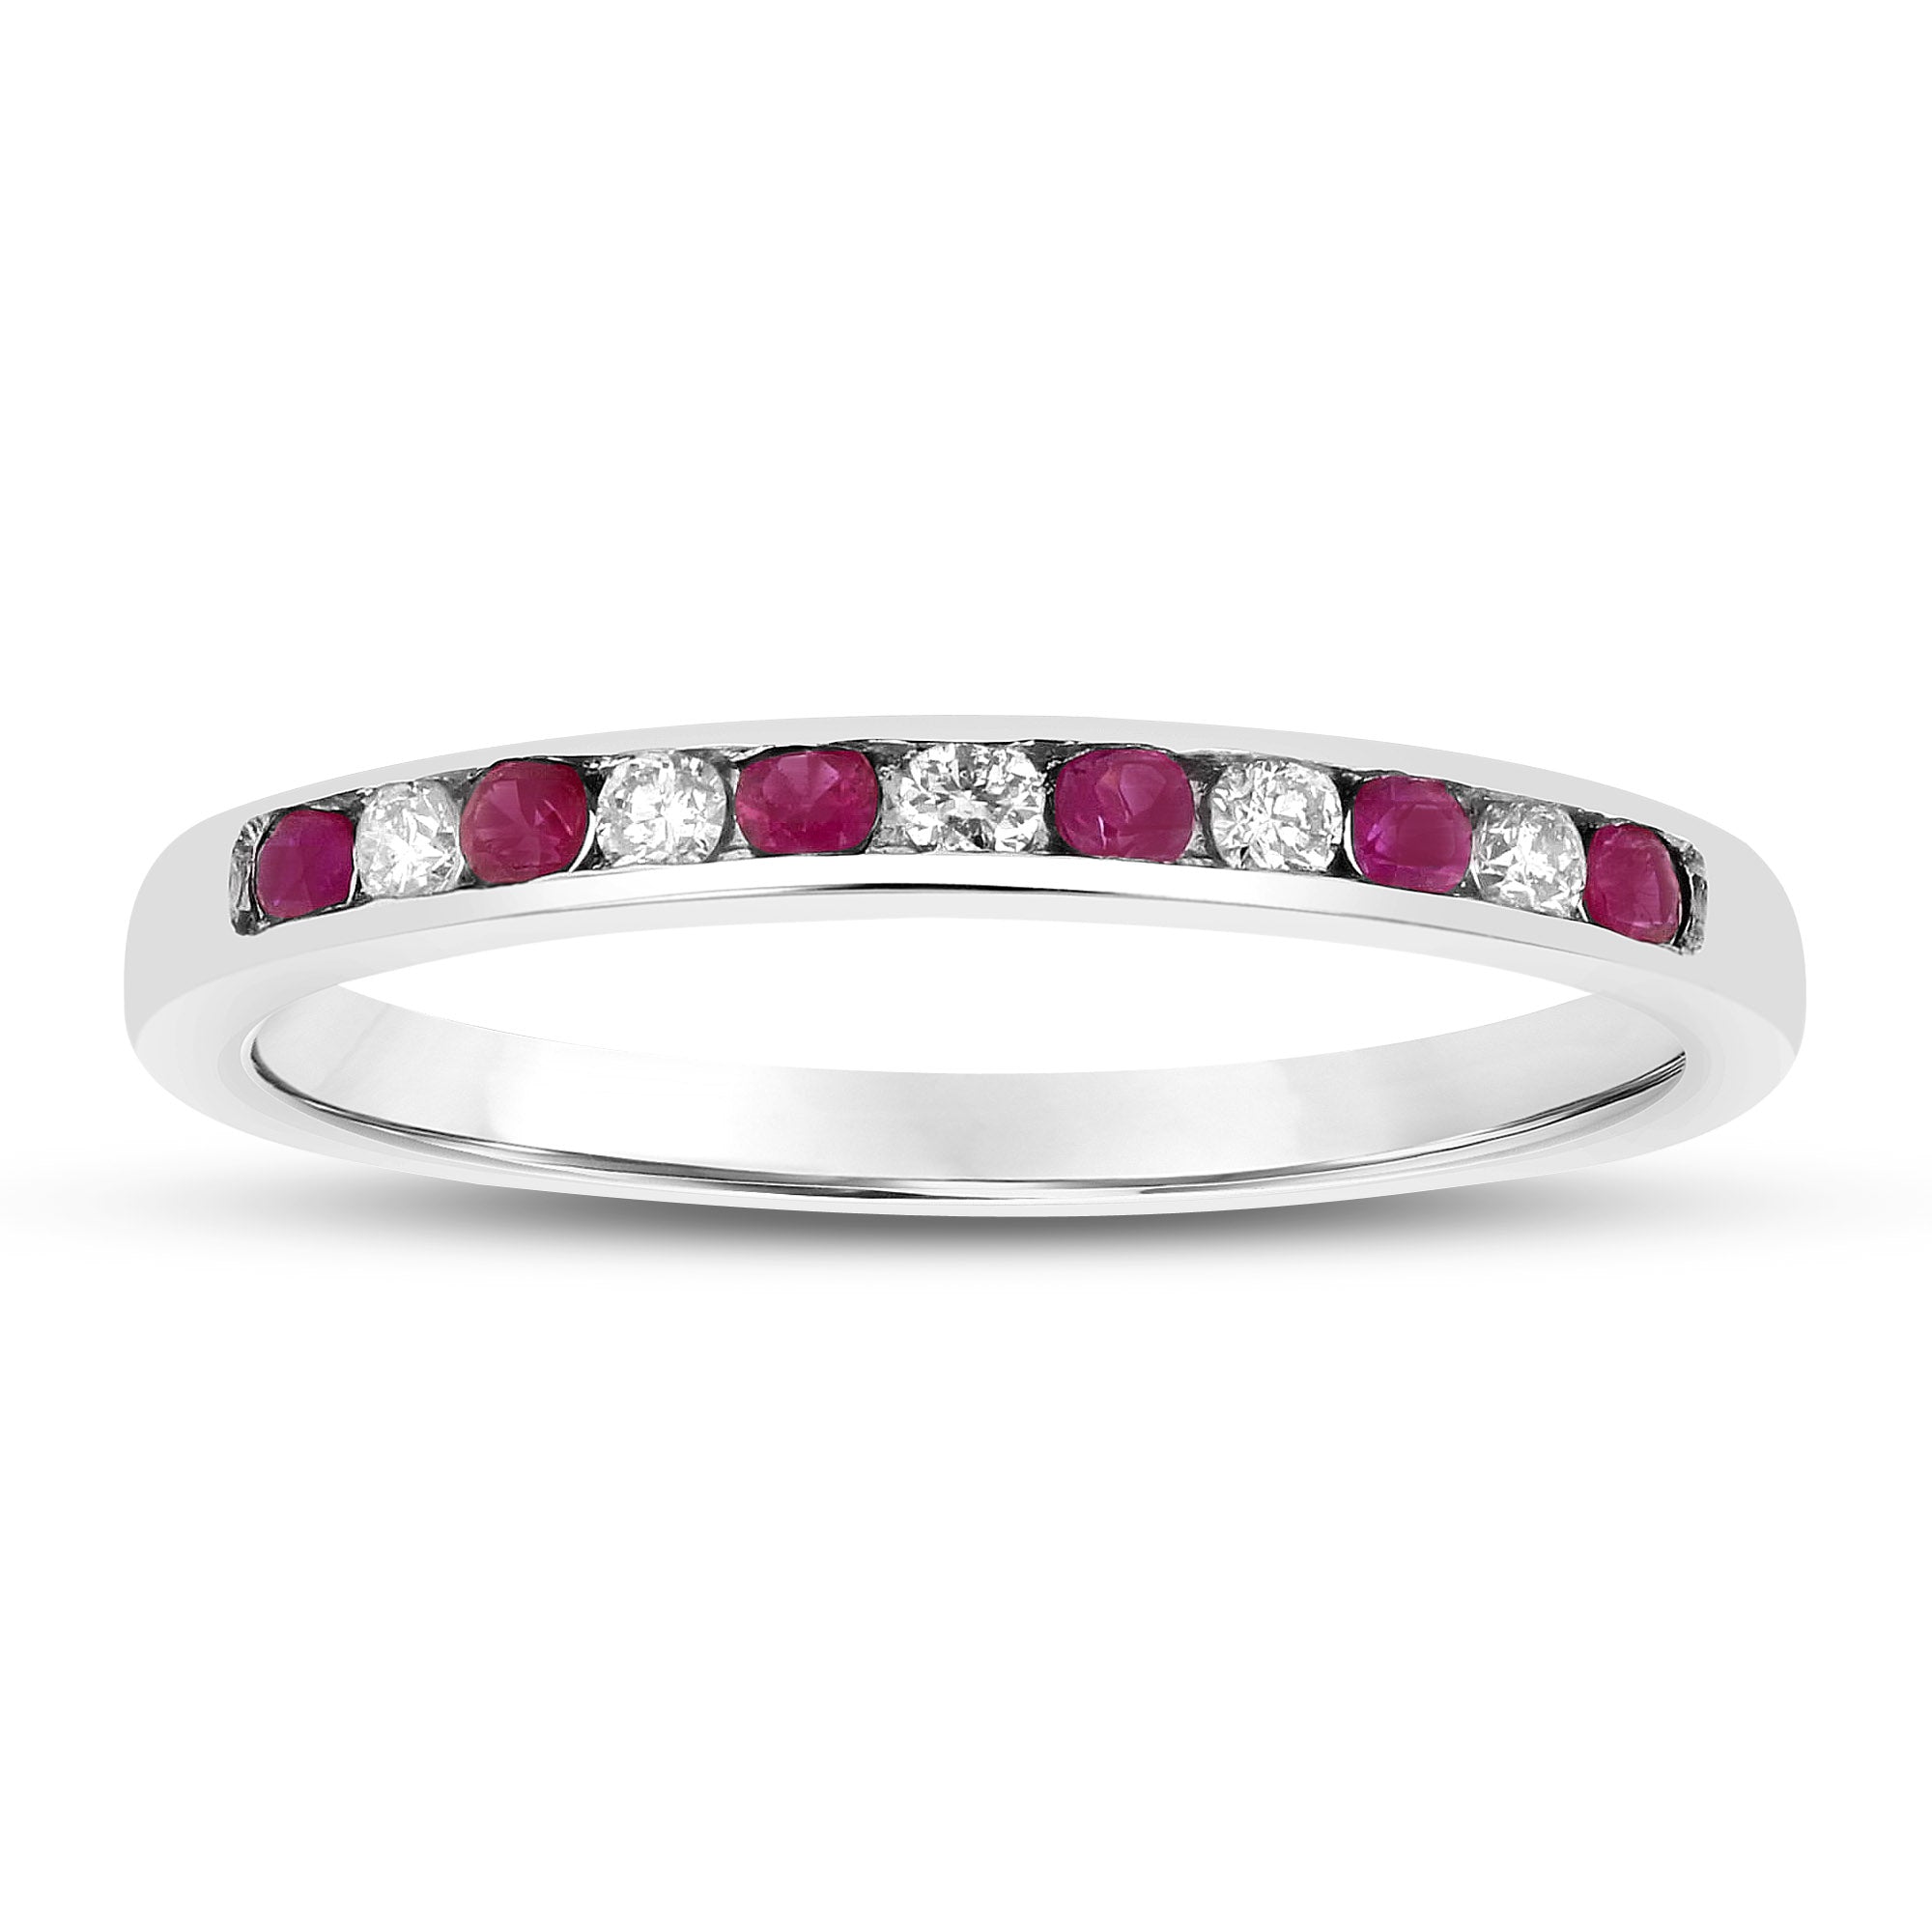 Diamond and Ruby Band in 14k Gold 0.25 c.t.w